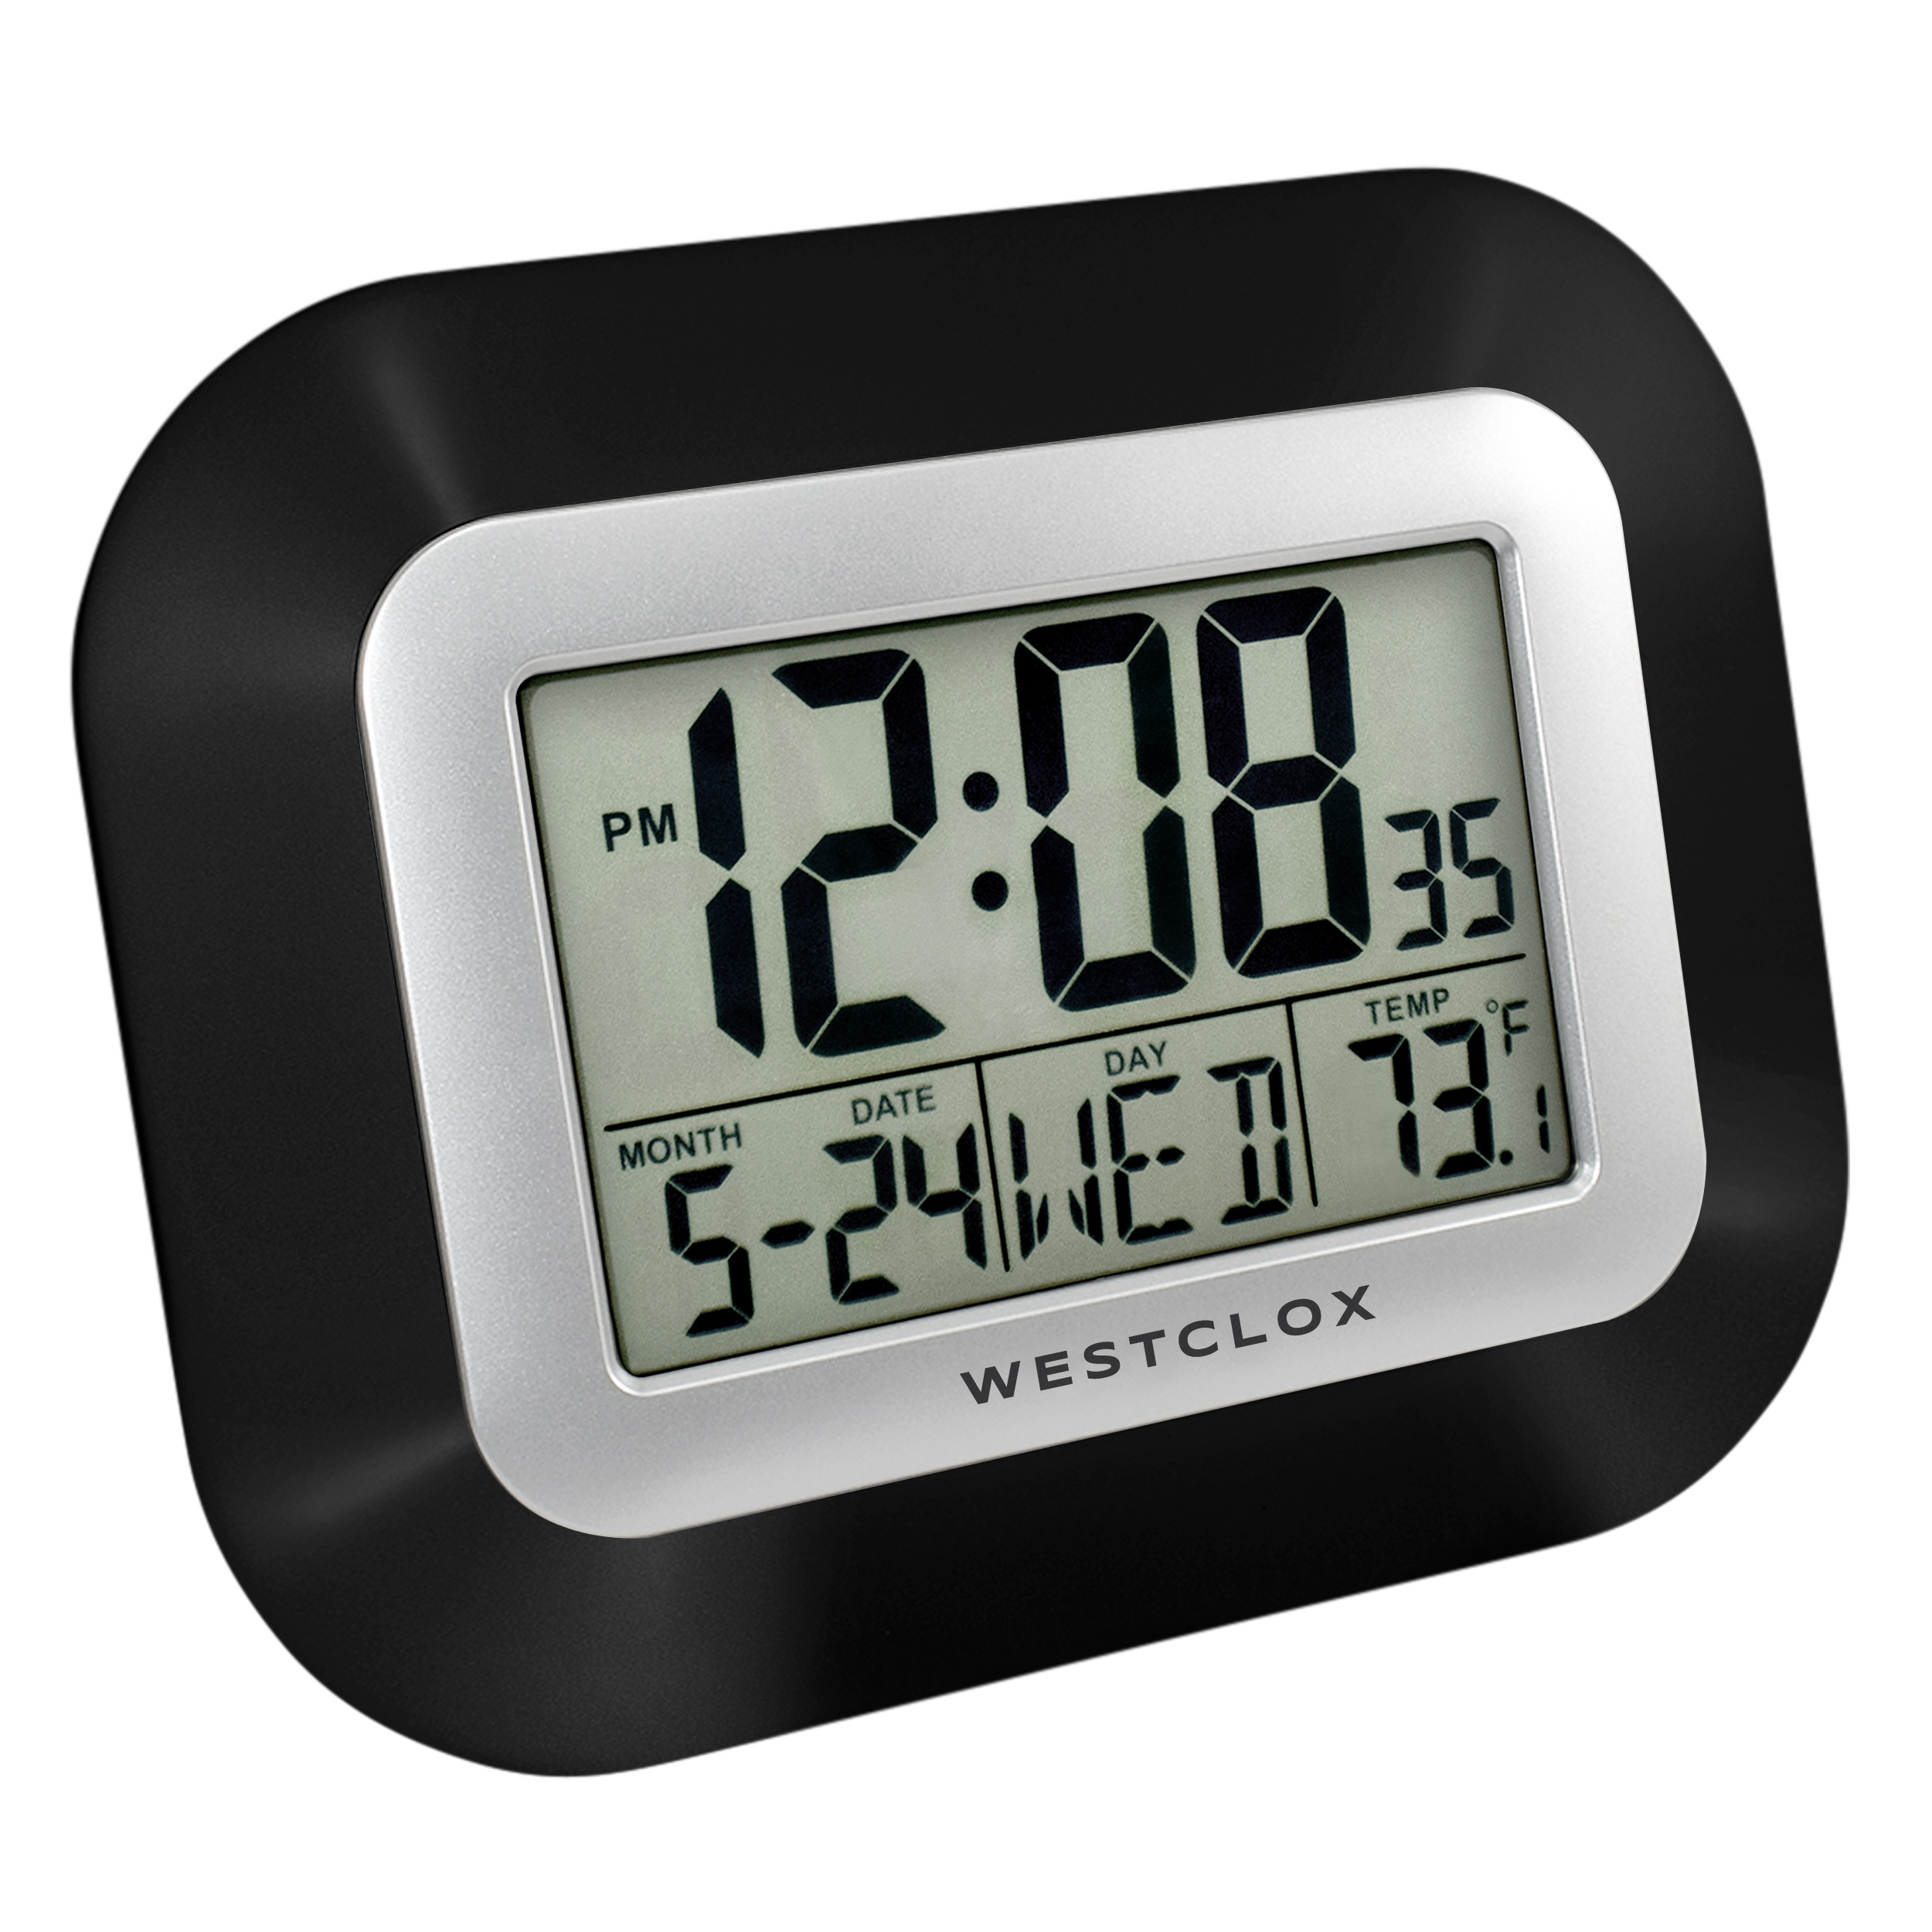 Westclox Classic Black Digital LCD Wall Clock with Date, Day and Temperature - image 2 of 6